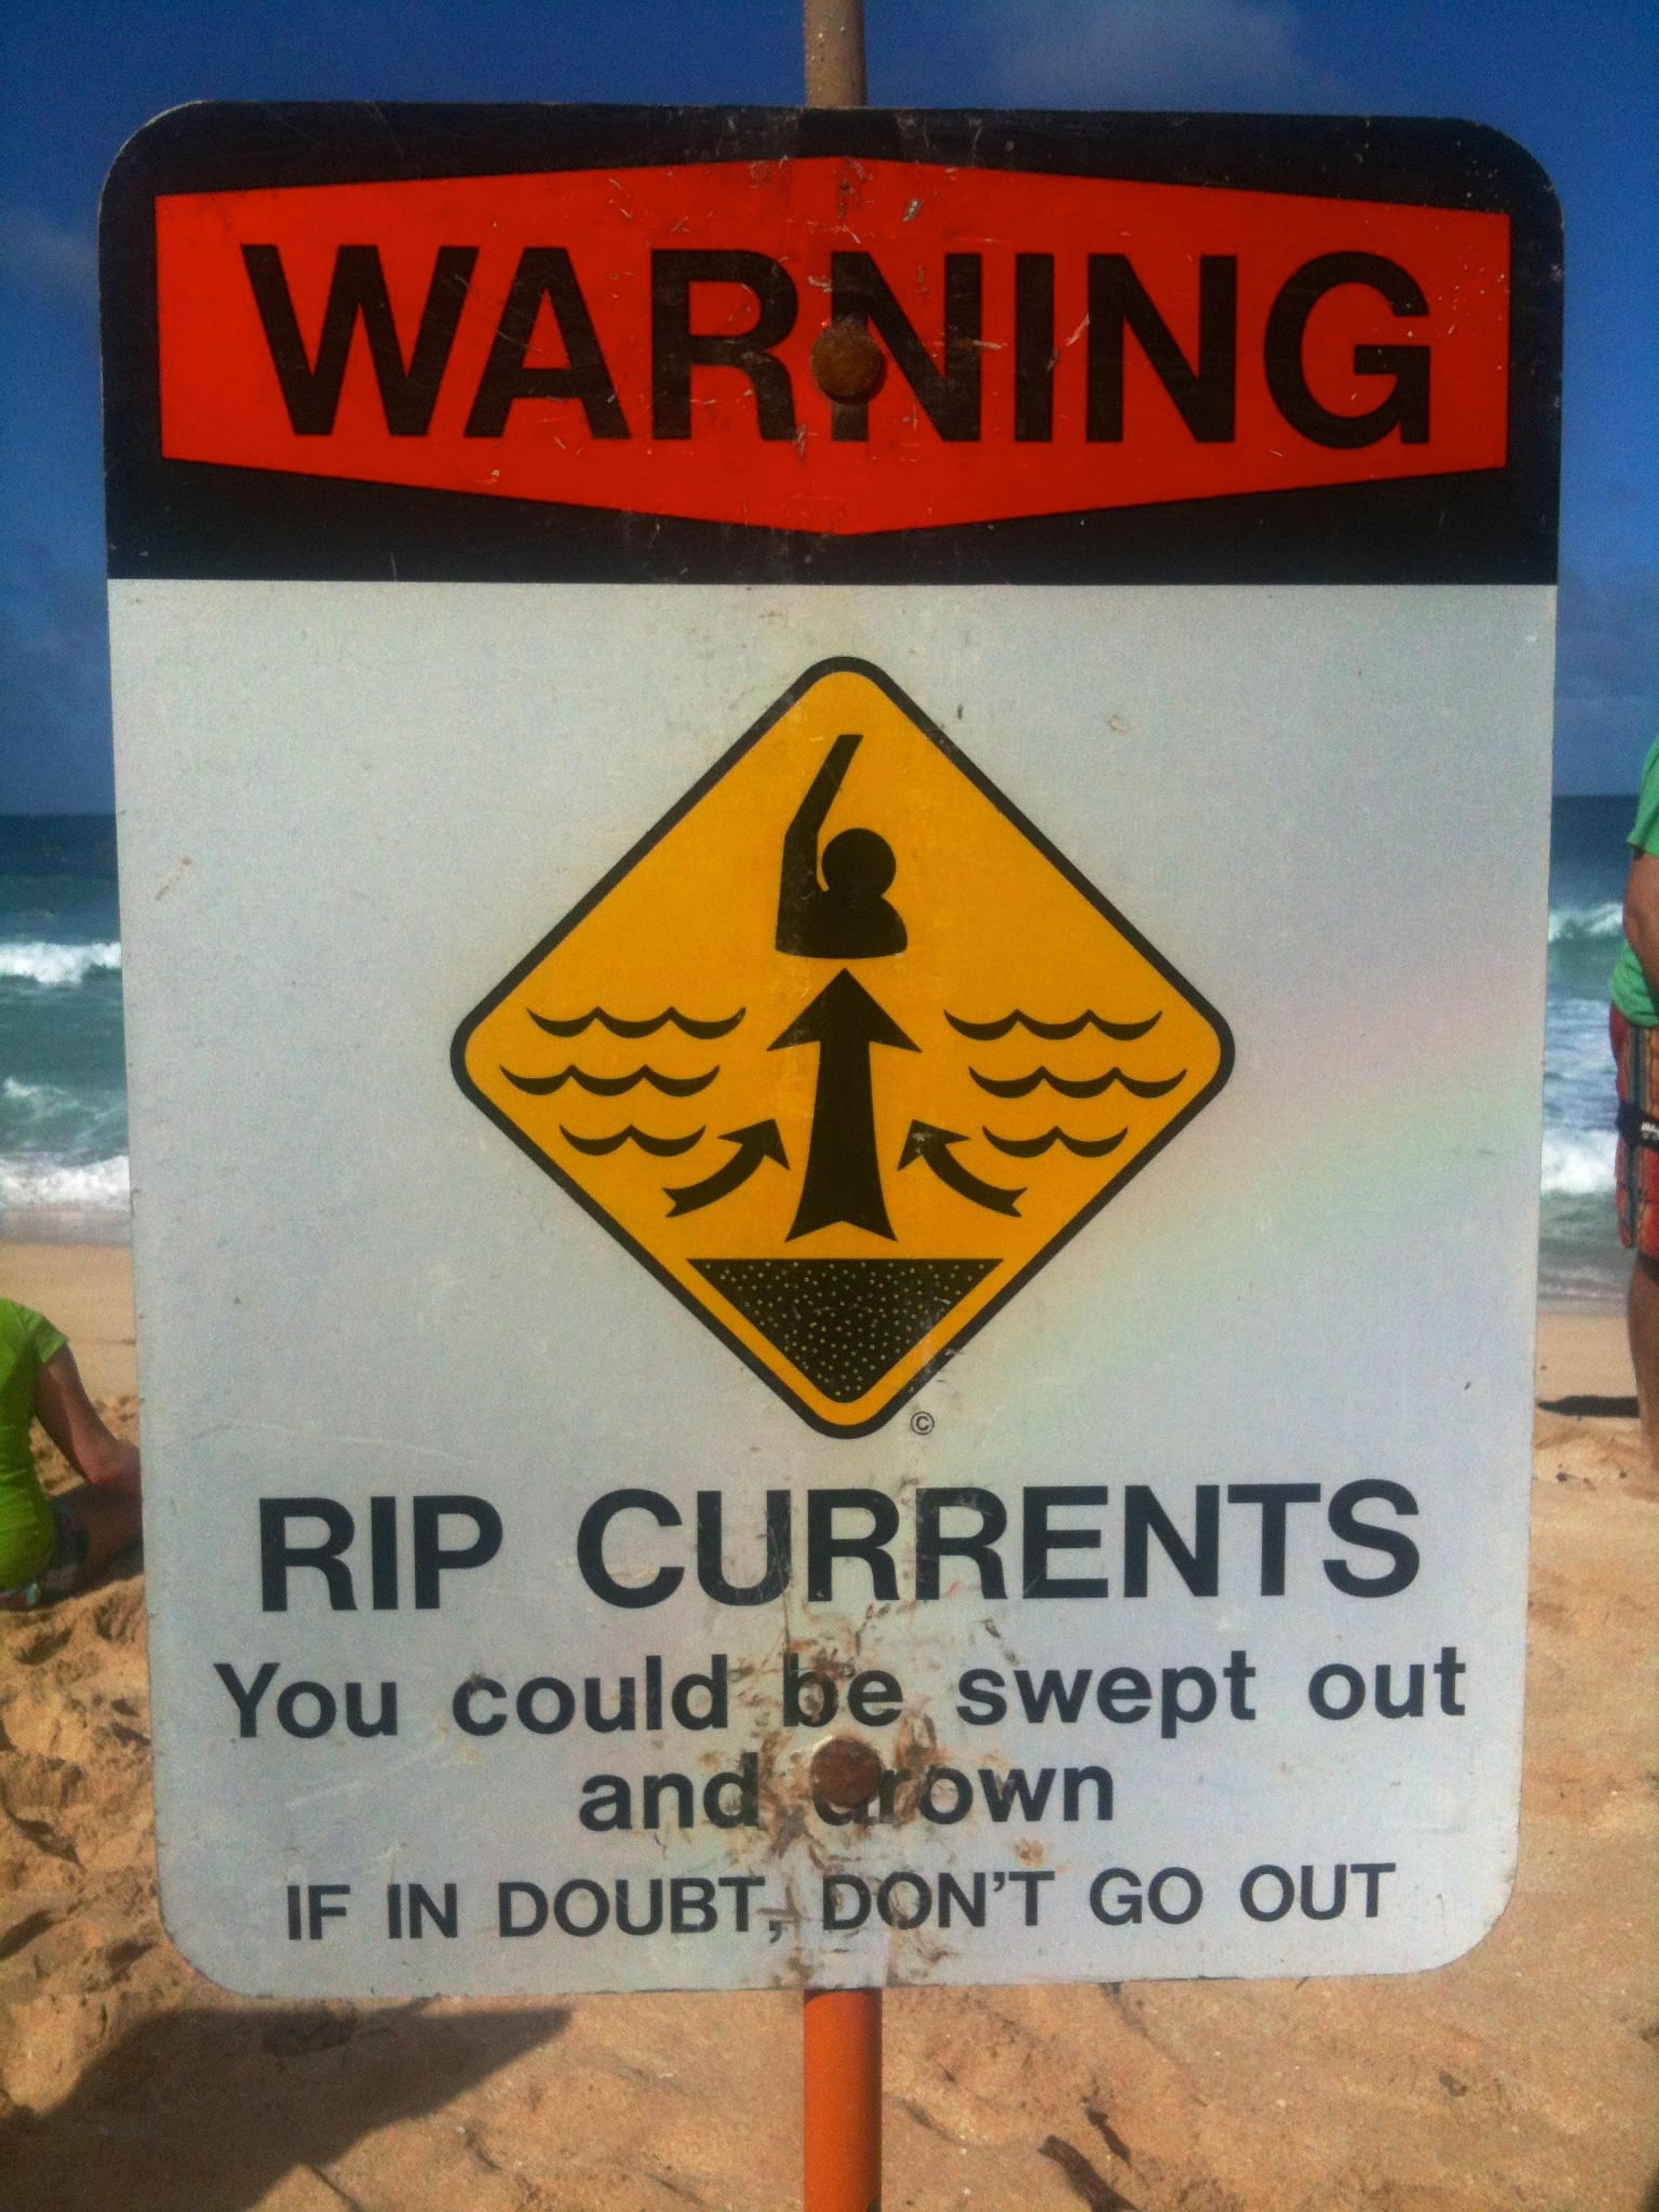 A warning sign about rip currents